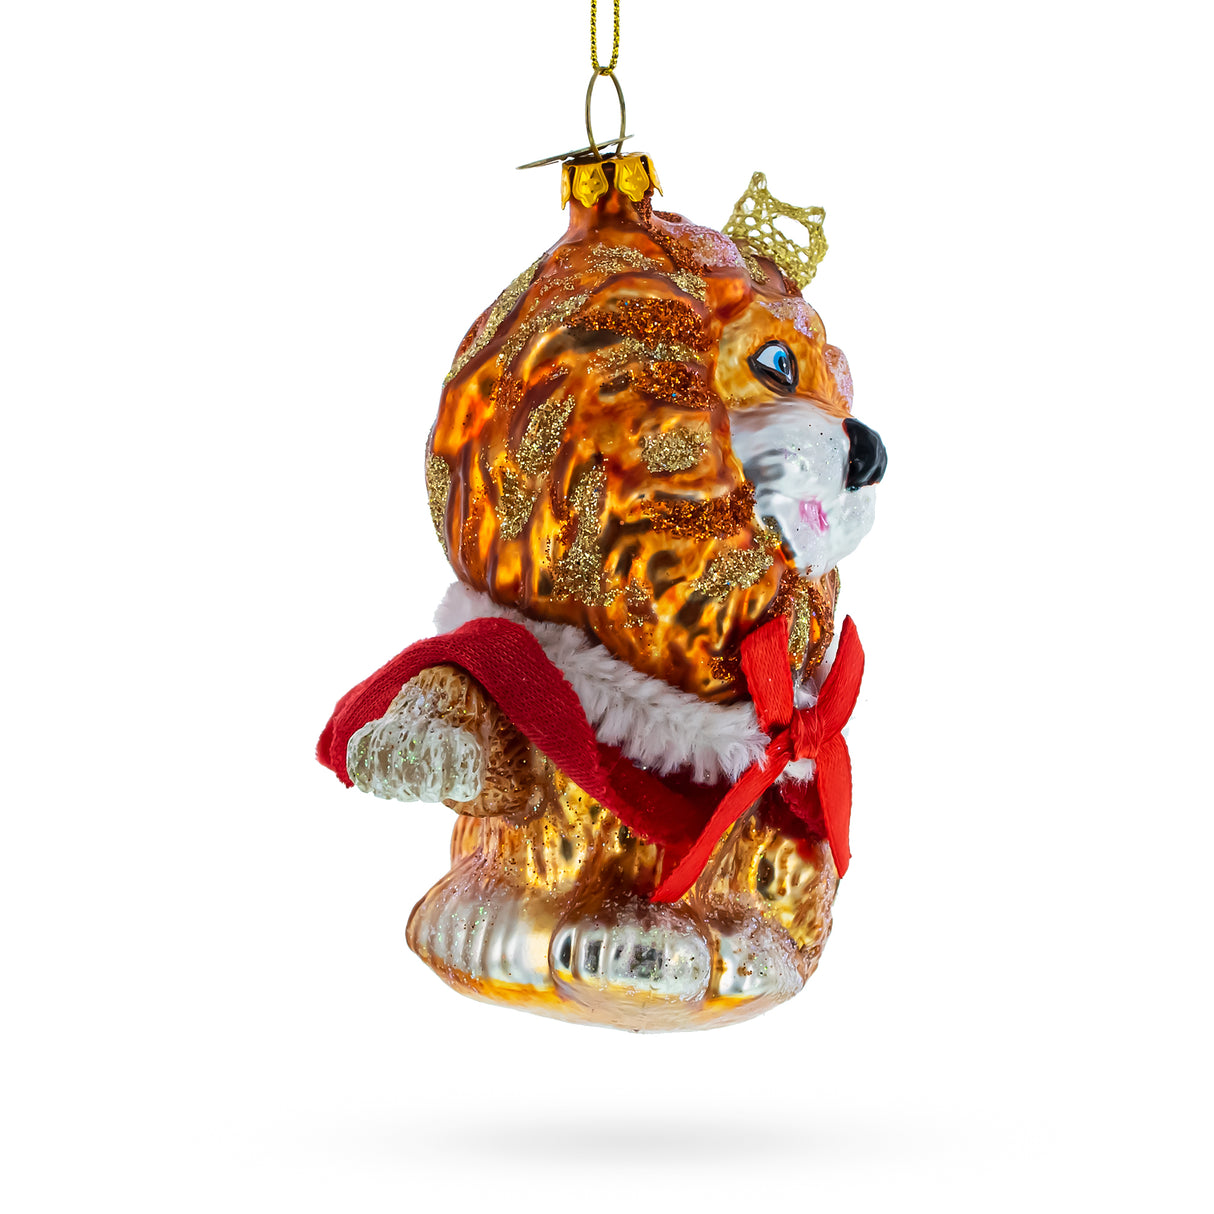 Buy Christmas Ornaments Animals Wild Animals Lions by BestPysanky Online Gift Ship